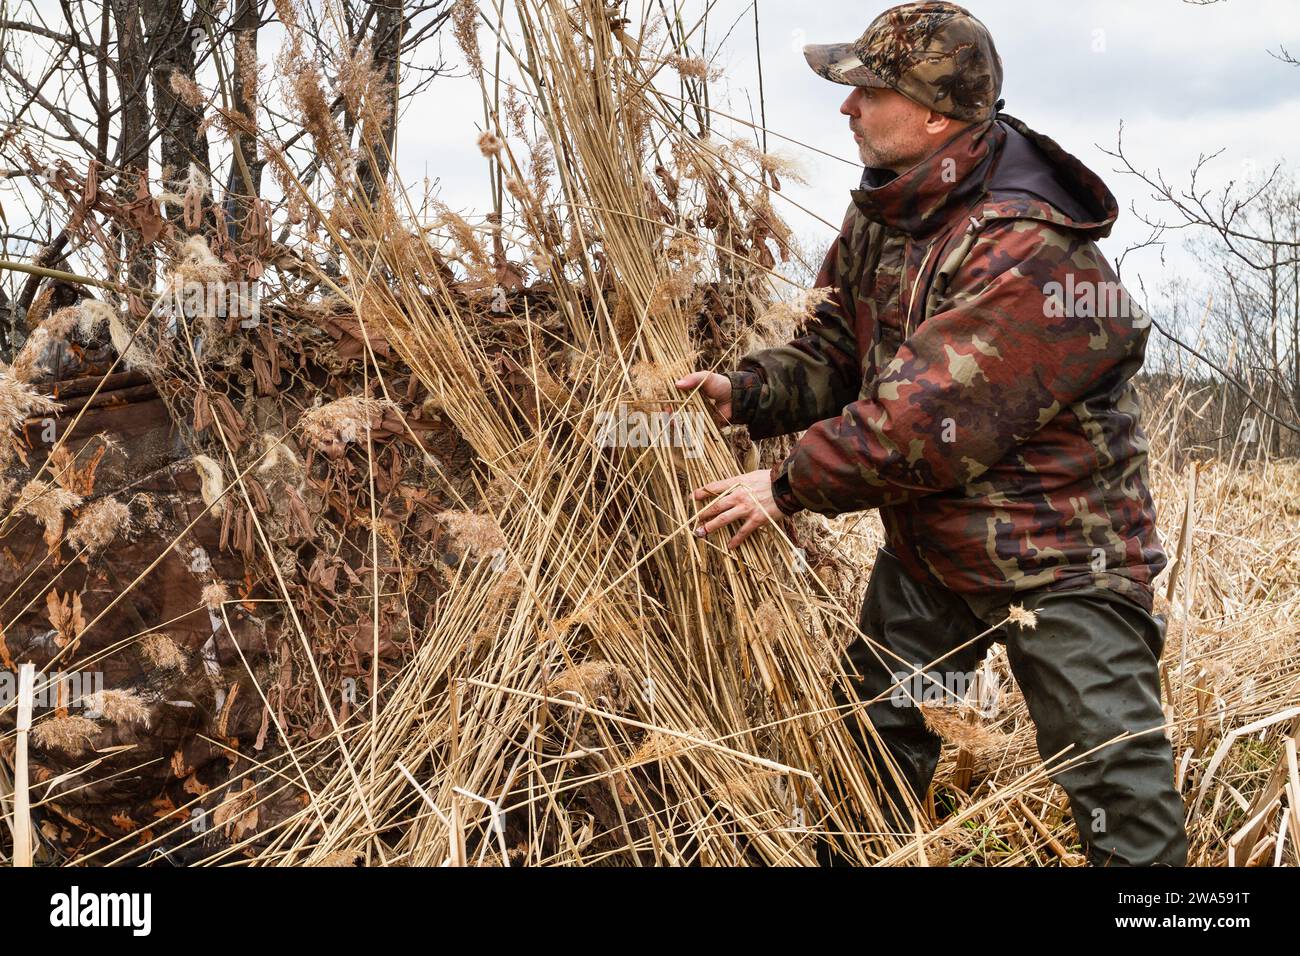 A duck hunter puts an armful of dry reeds on his hunting blind. He disguises his hiding place for hunting. Around - a swamp overgrown with reeds. Stock Photo